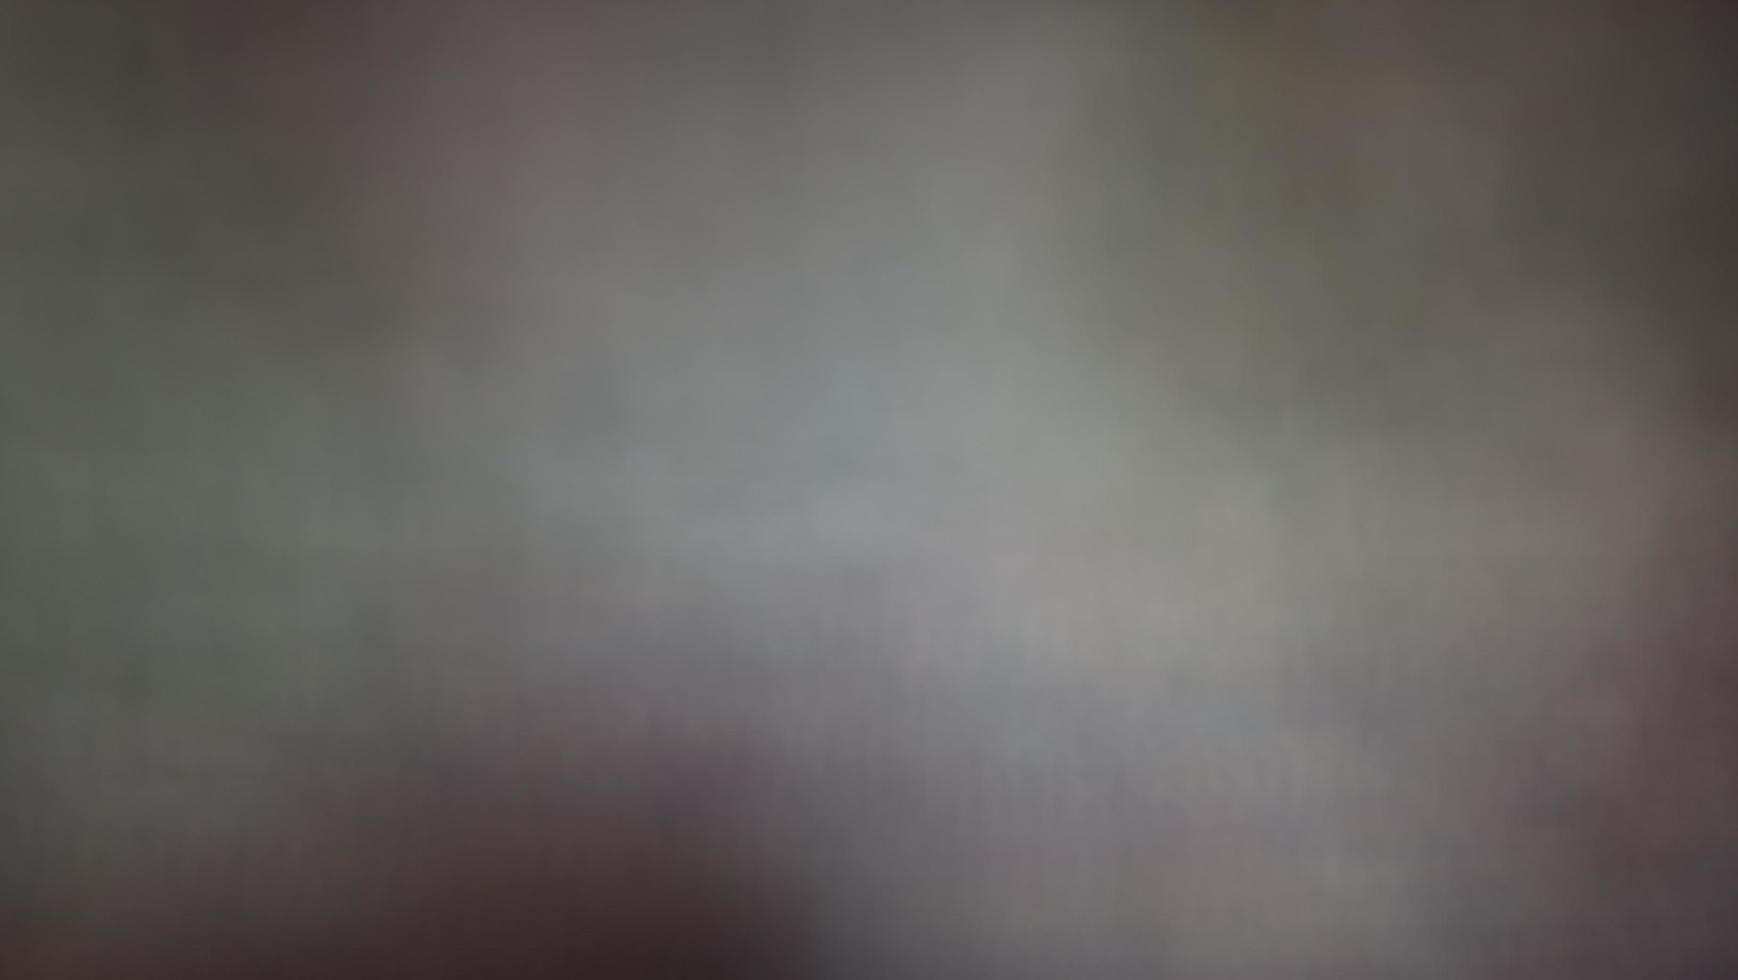 Abstract blur background with brown gray, black, white and earth tones. photo